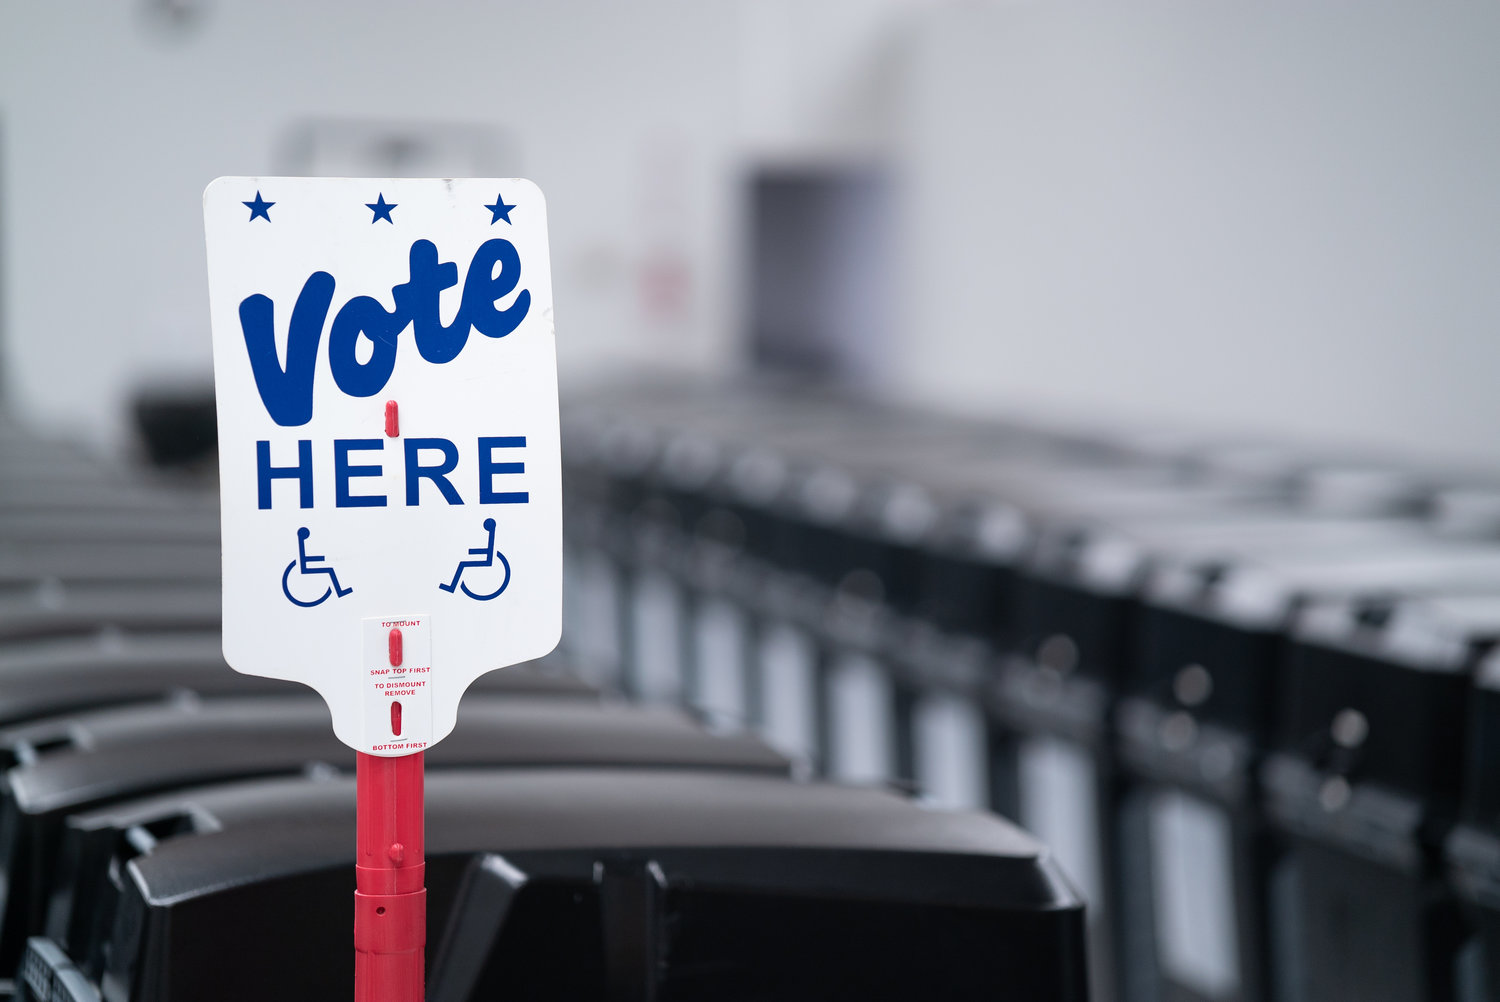 Early Voting begins on May 10, at the Doña Ana County Government Center and continues Monday through Friday, 8:00 am – 5:00 pm, through June 3.